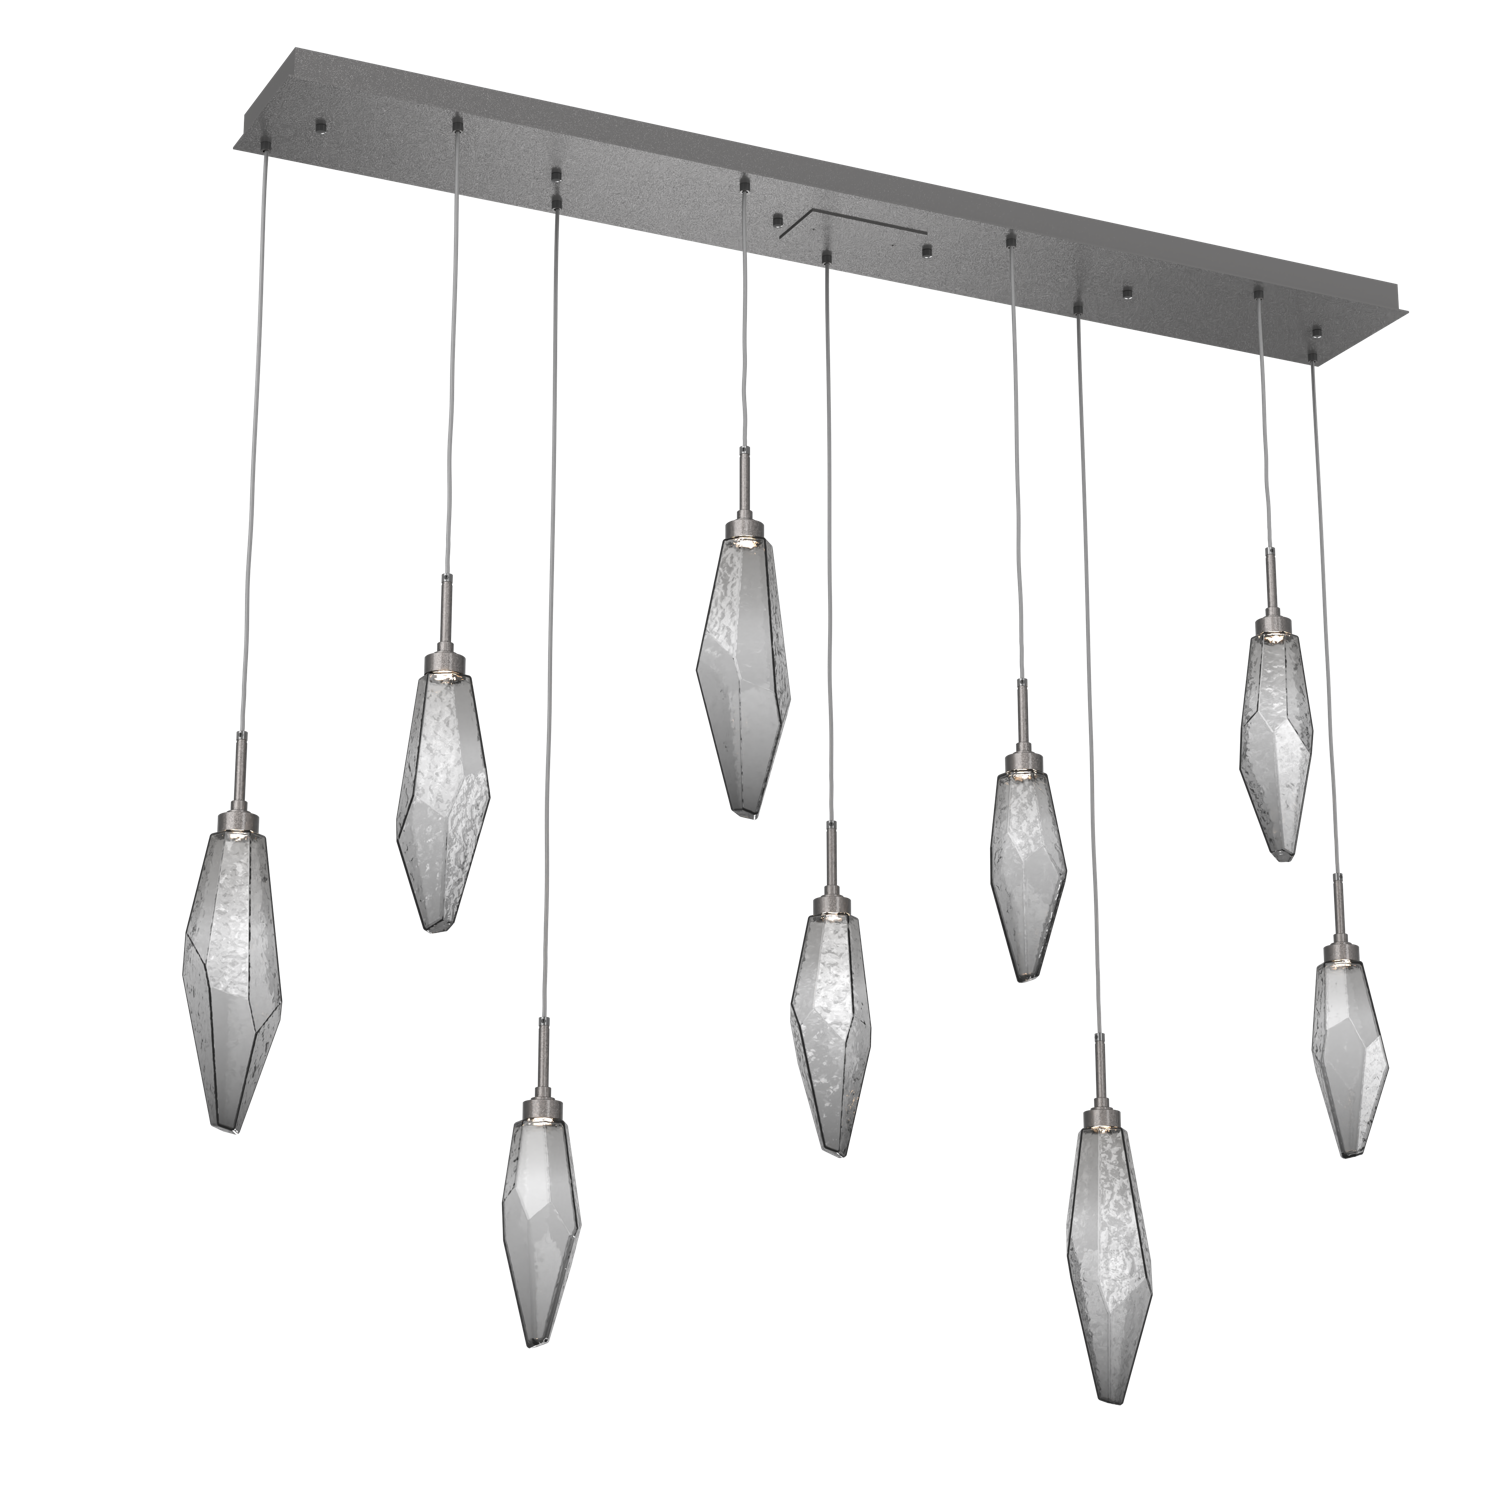 PLB0050-09-GP-CS-Hammerton-Studio-Rock-Crystal-9-light-linear-pendant-chandelier-with-graphite-finish-and-chilled-smoke-glass-shades-and-LED-lamping